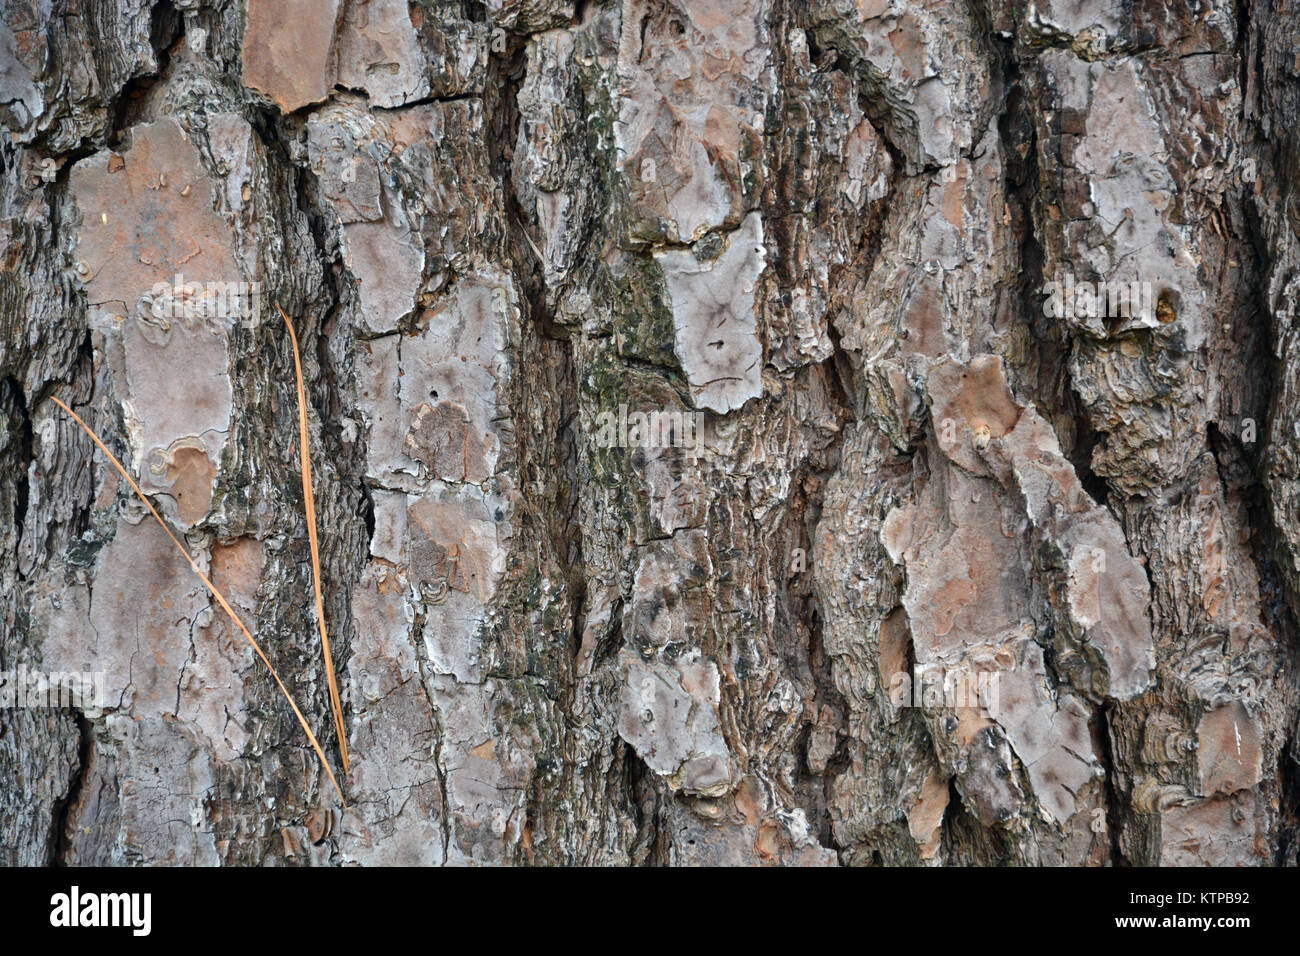 https://c8.alamy.com/comp/KTPB92/close-up-of-the-thick-bark-on-a-loblolly-or-yellow-pine-tree-KTPB92.jpg